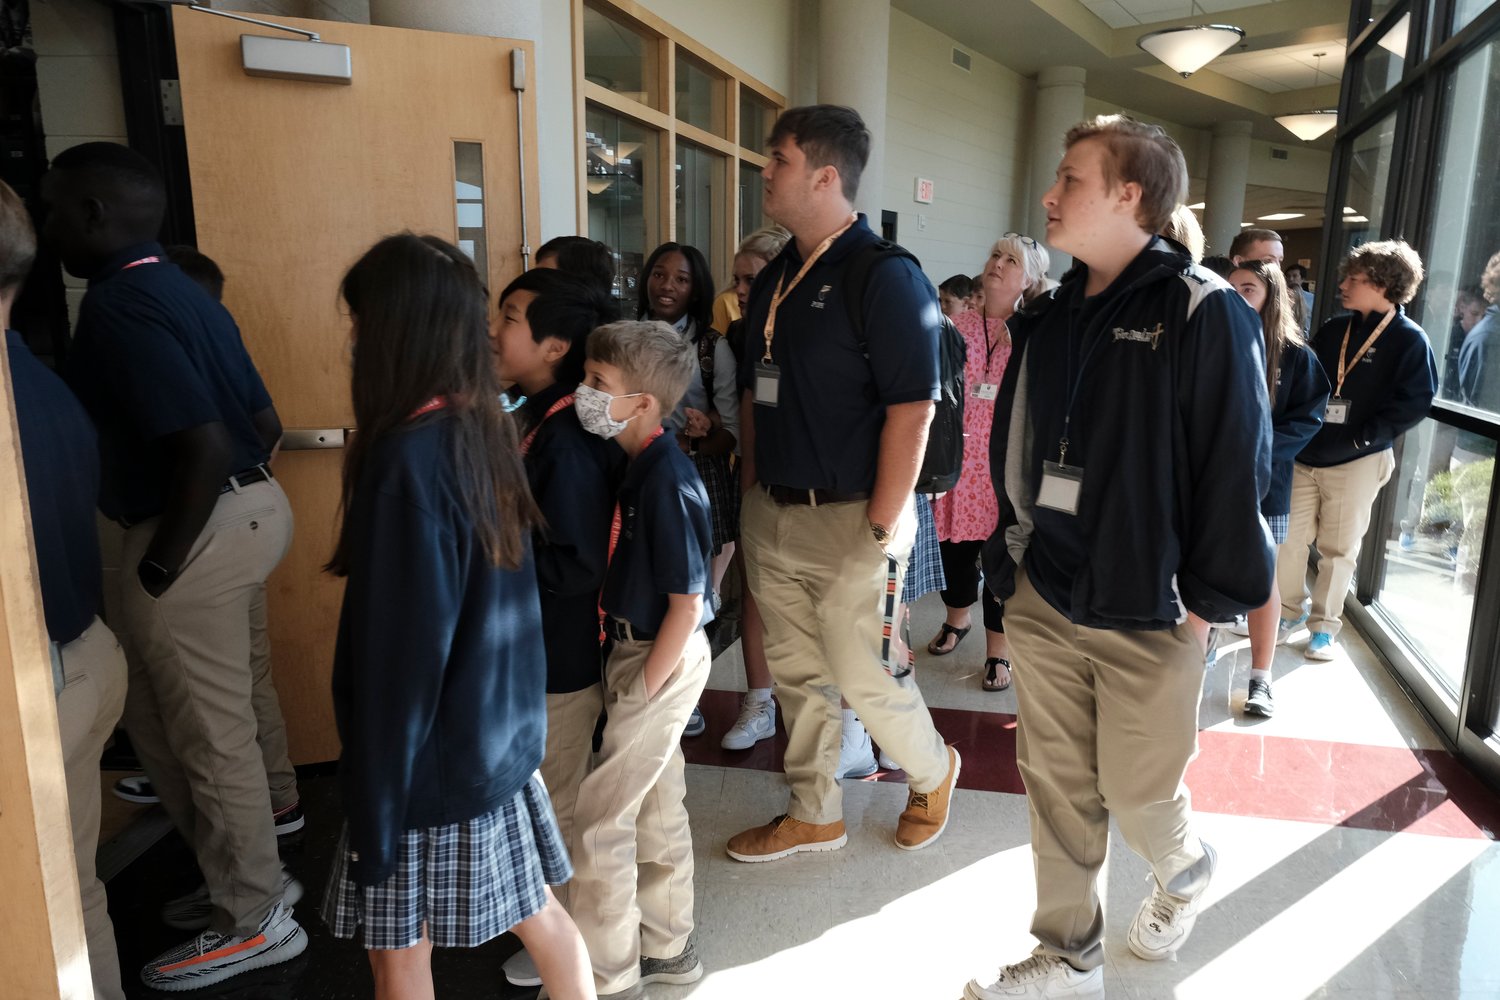 The Congregation for Catholic Education issued a document on the importance of promoting and safeguarding the Catholic identity of Catholic schools, which includes fostering dialogue.